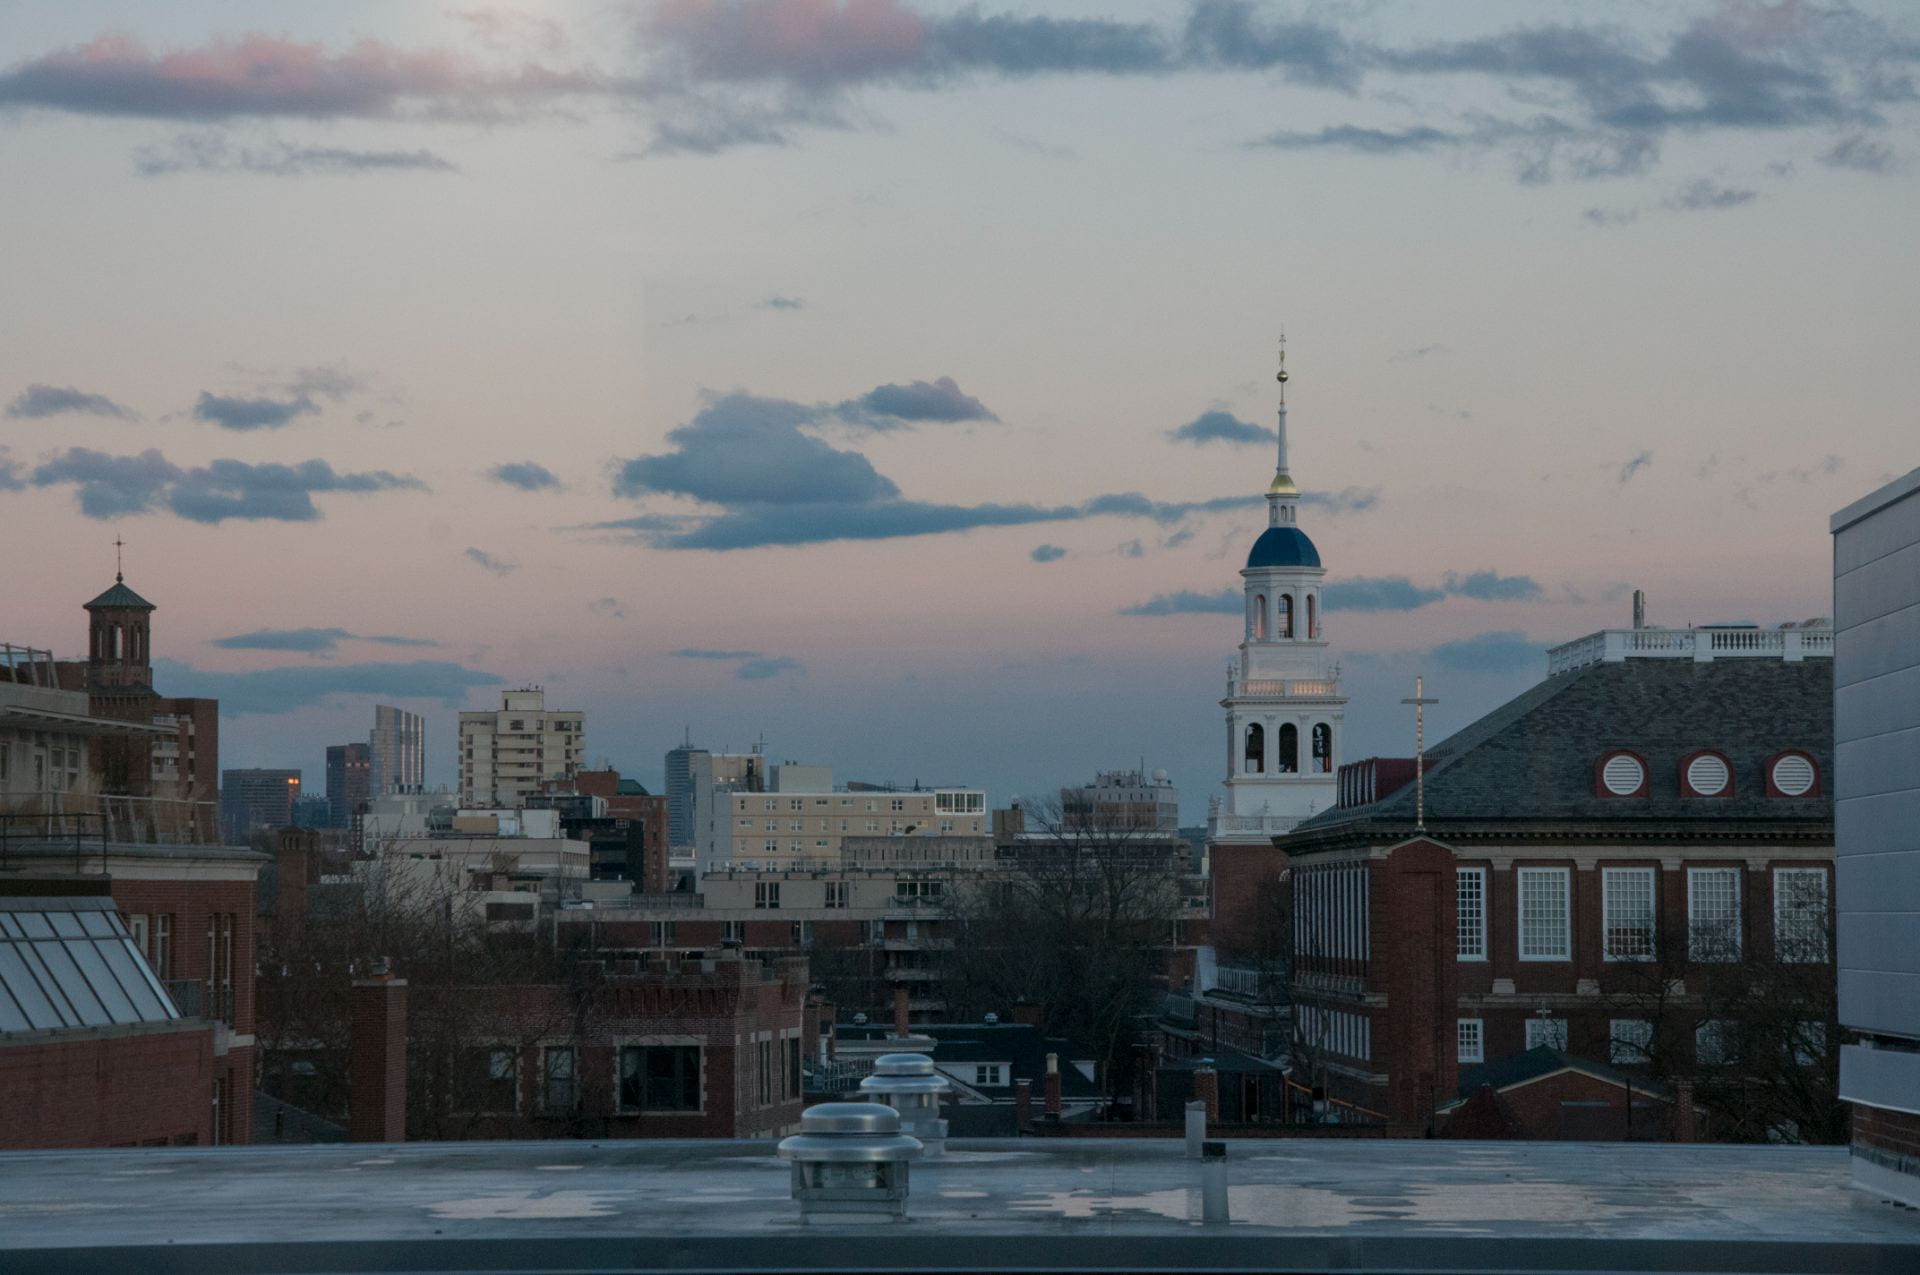 Image of Harvard Skyline, including Lowell House and the Malkin Athletics Center